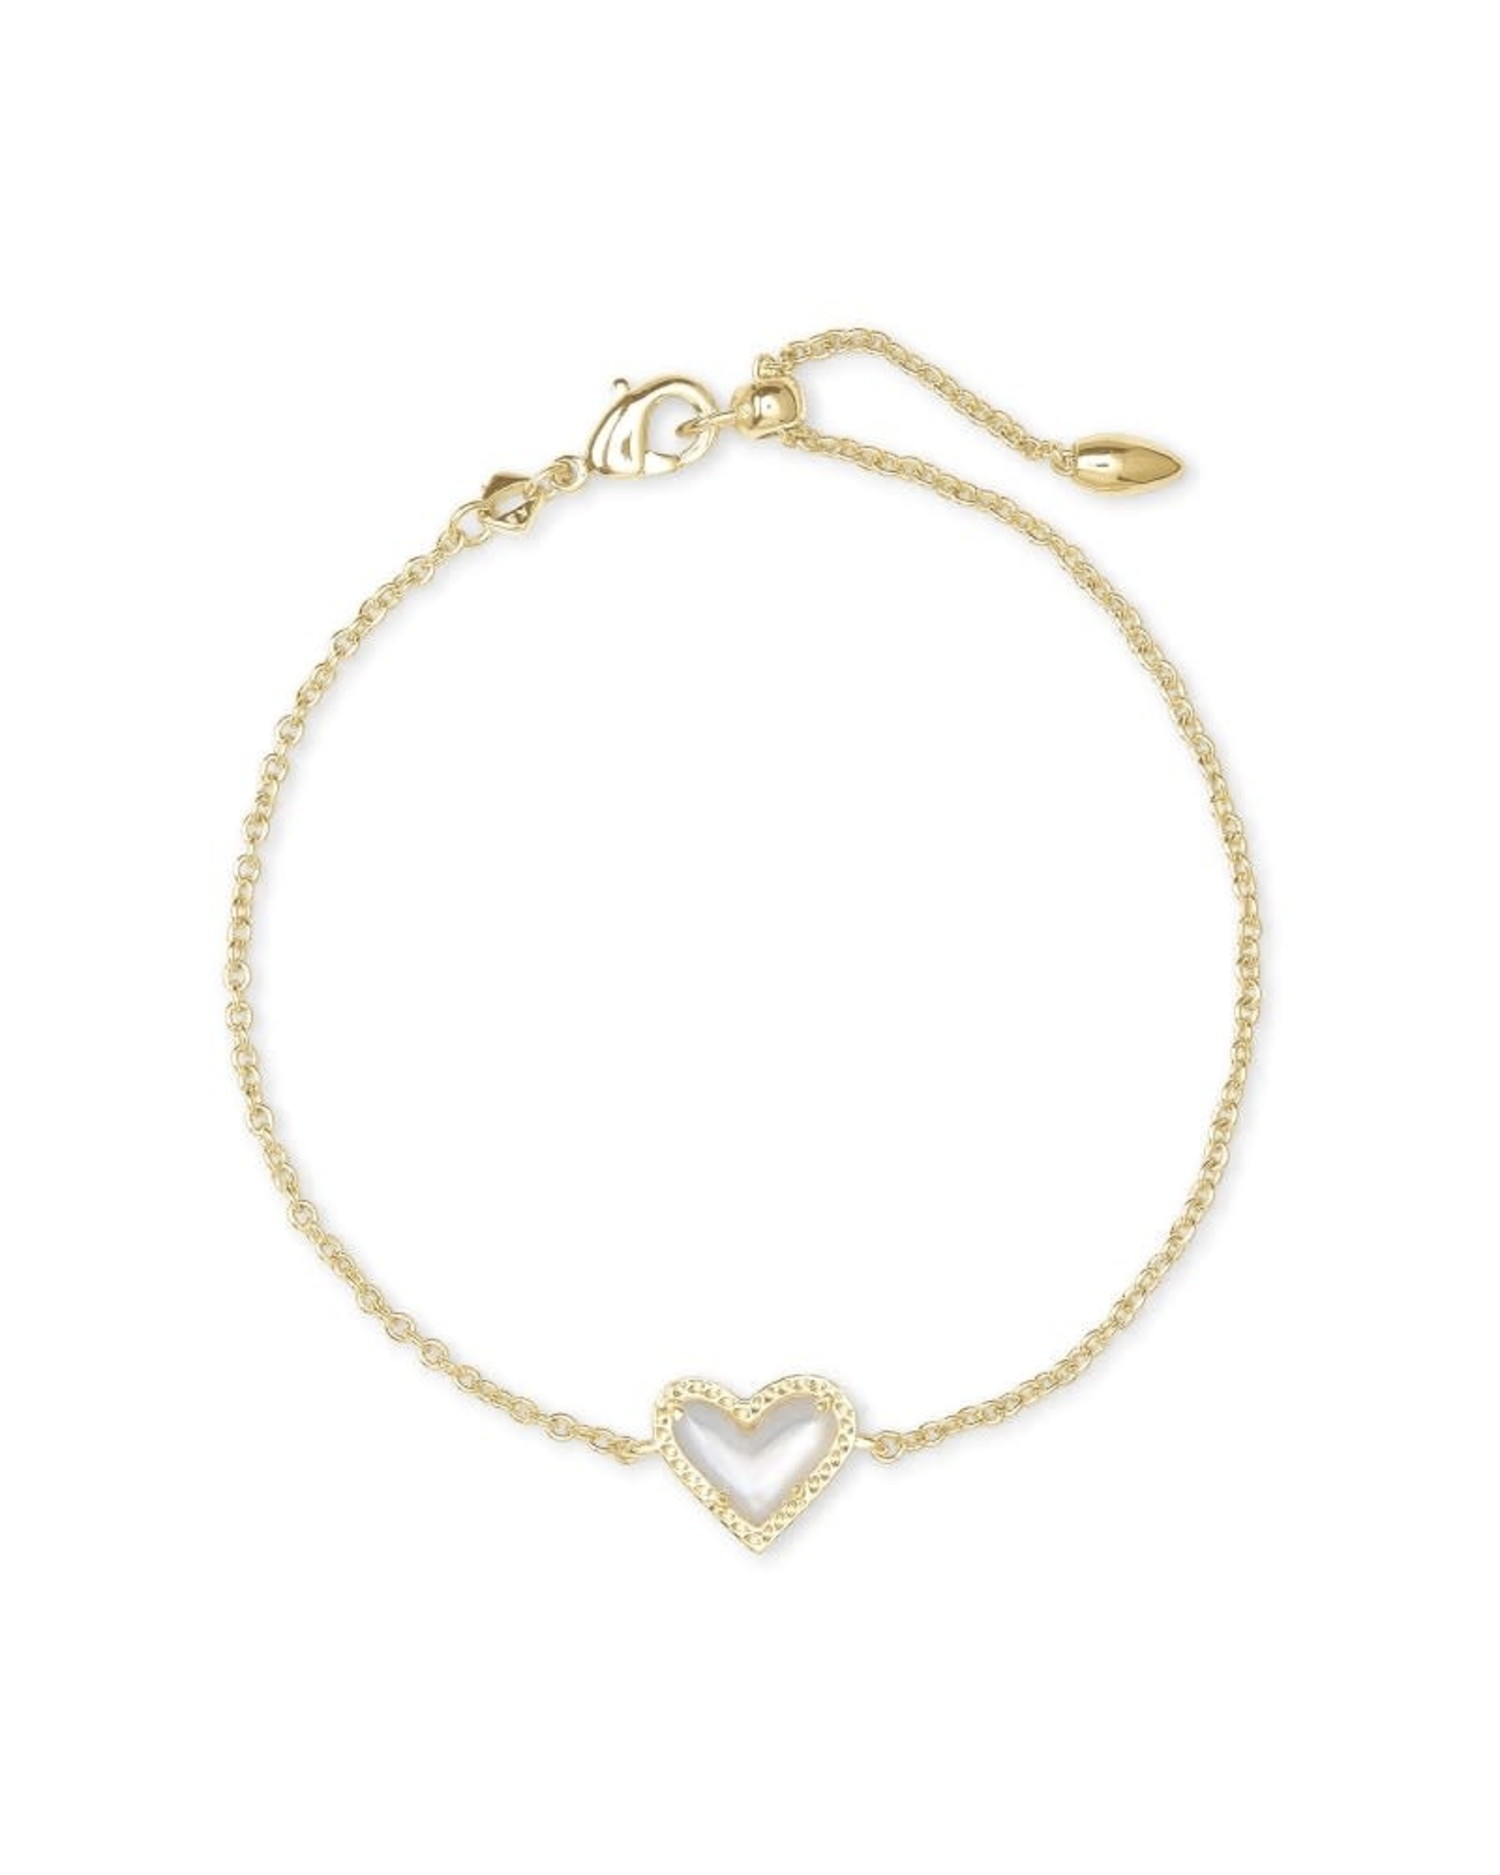 Kendra Scott Ari Heart Bracelet Gold Ivory Mother of Pearl - The District  On Main